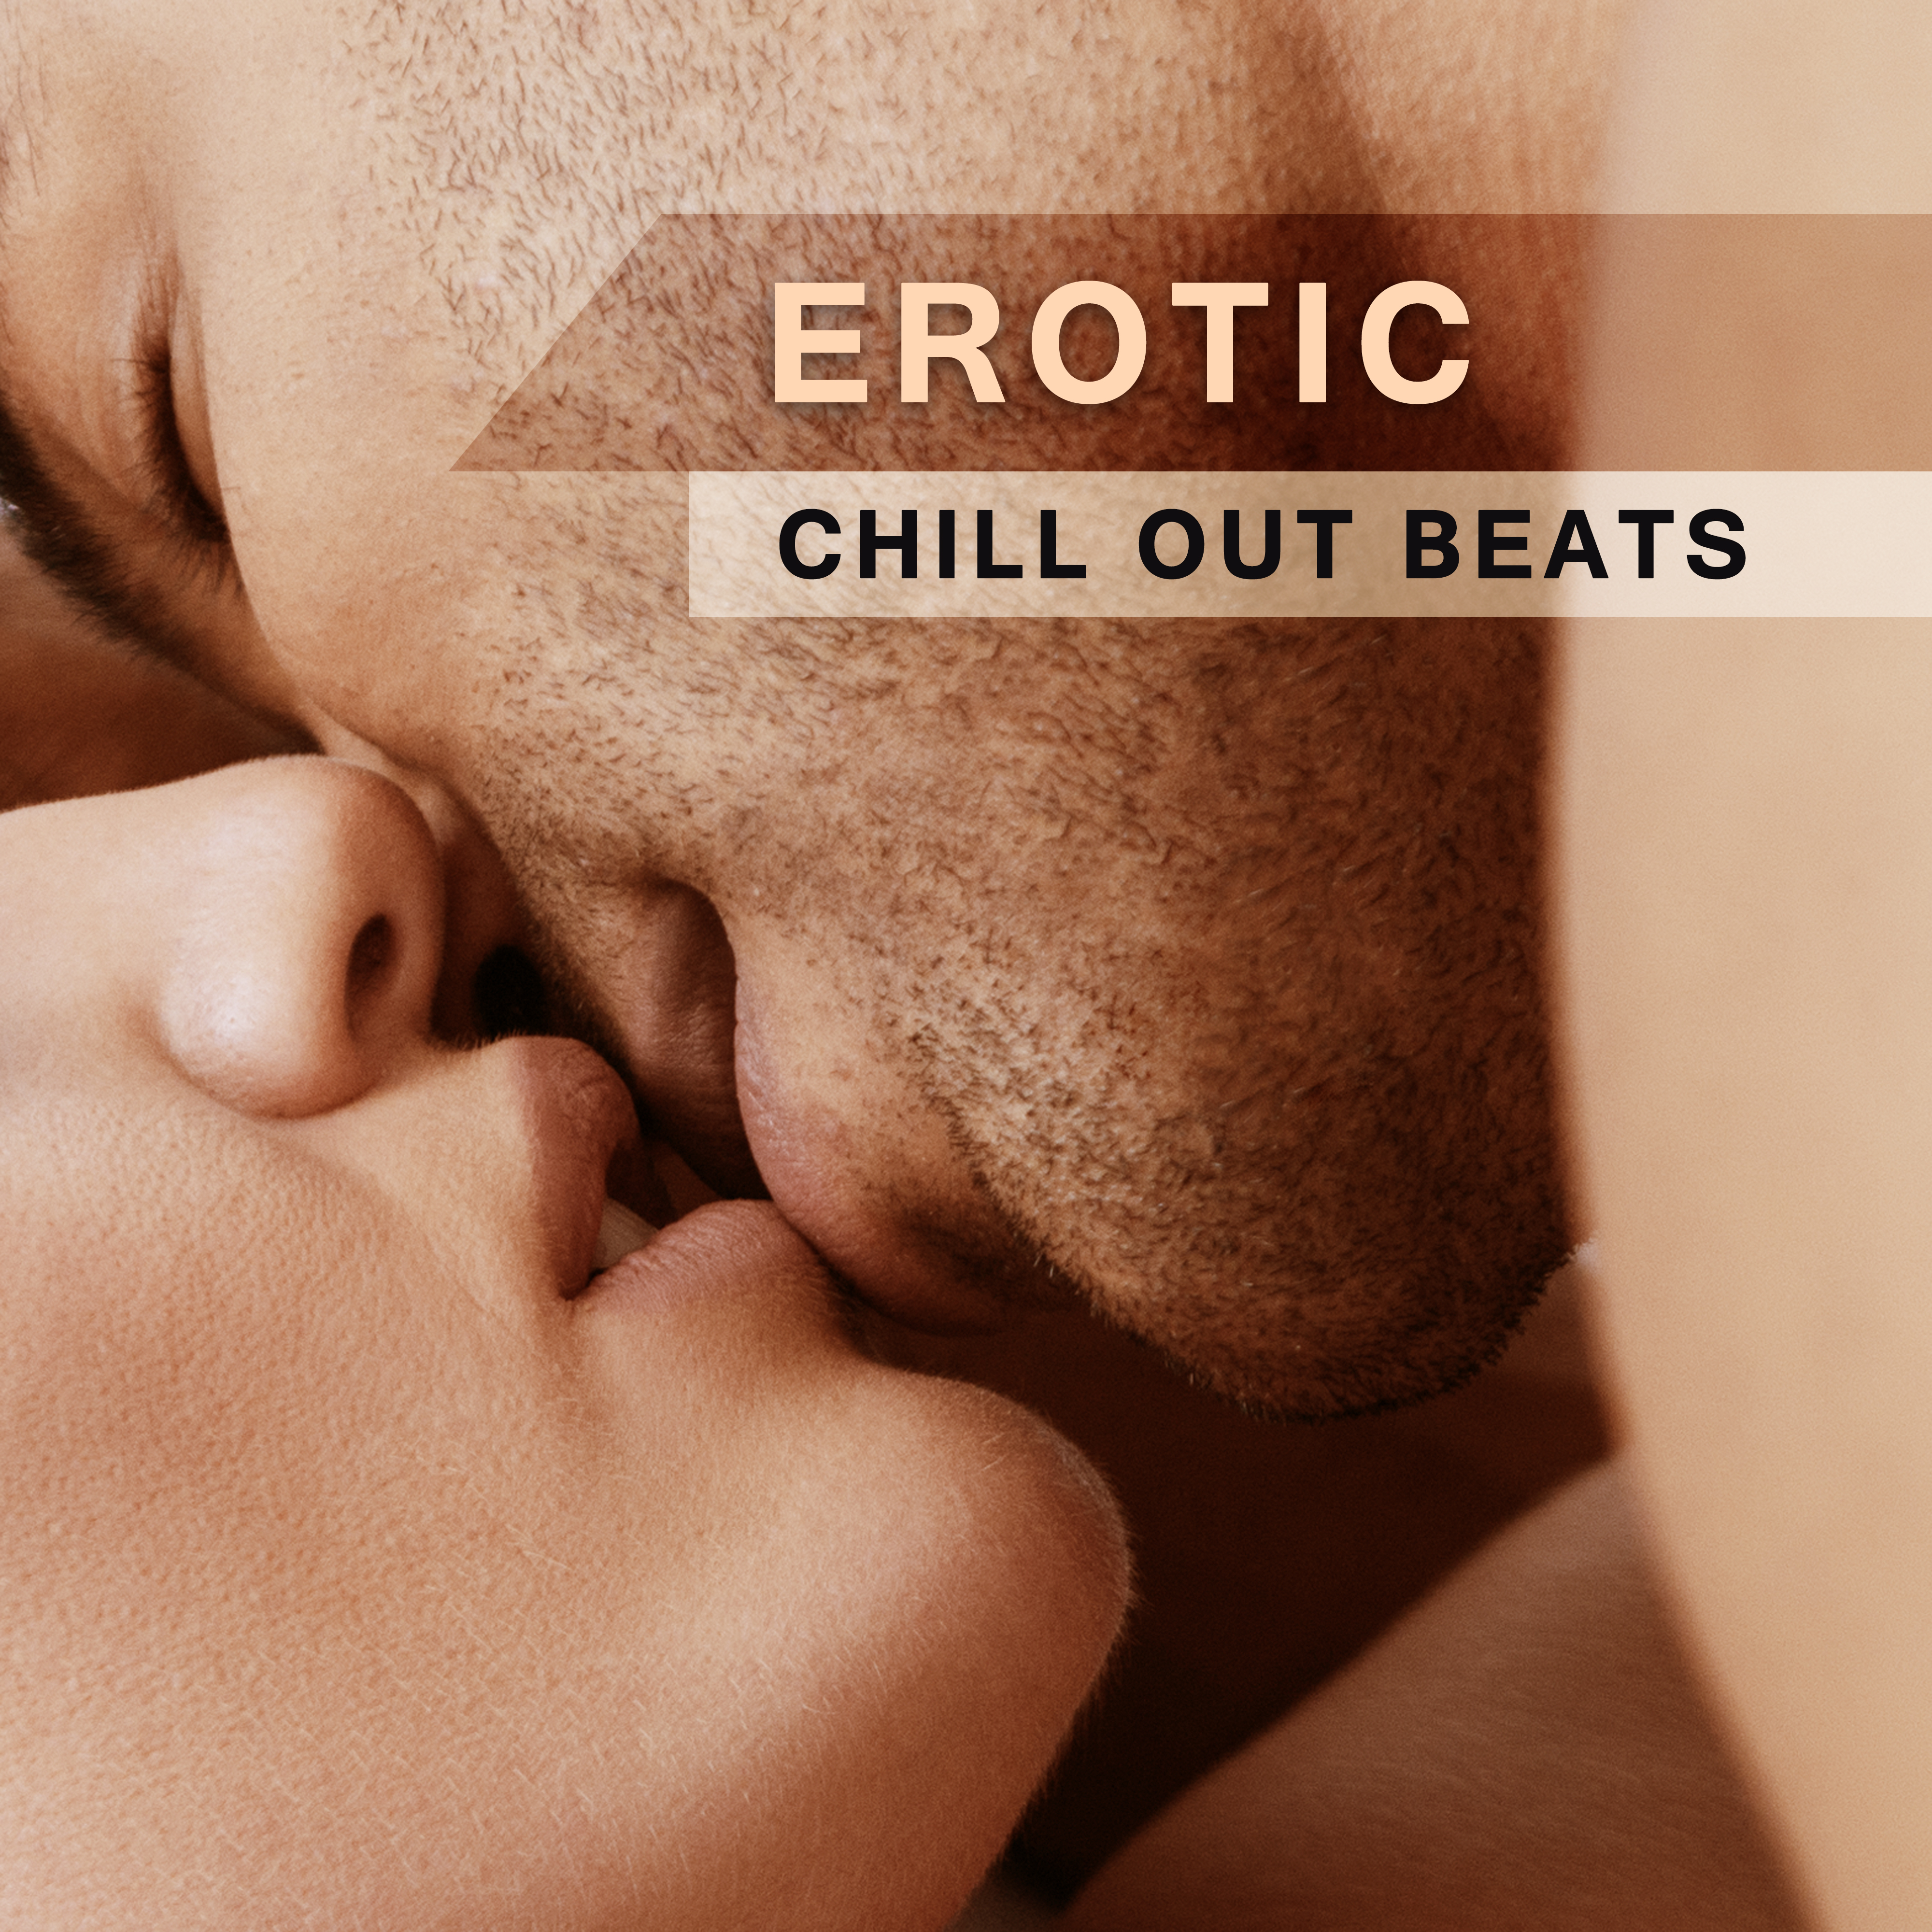 Erotic Chill Out Beats  Summer Lovers,  Chill Out Songs, Hotel Room, Romantic Music